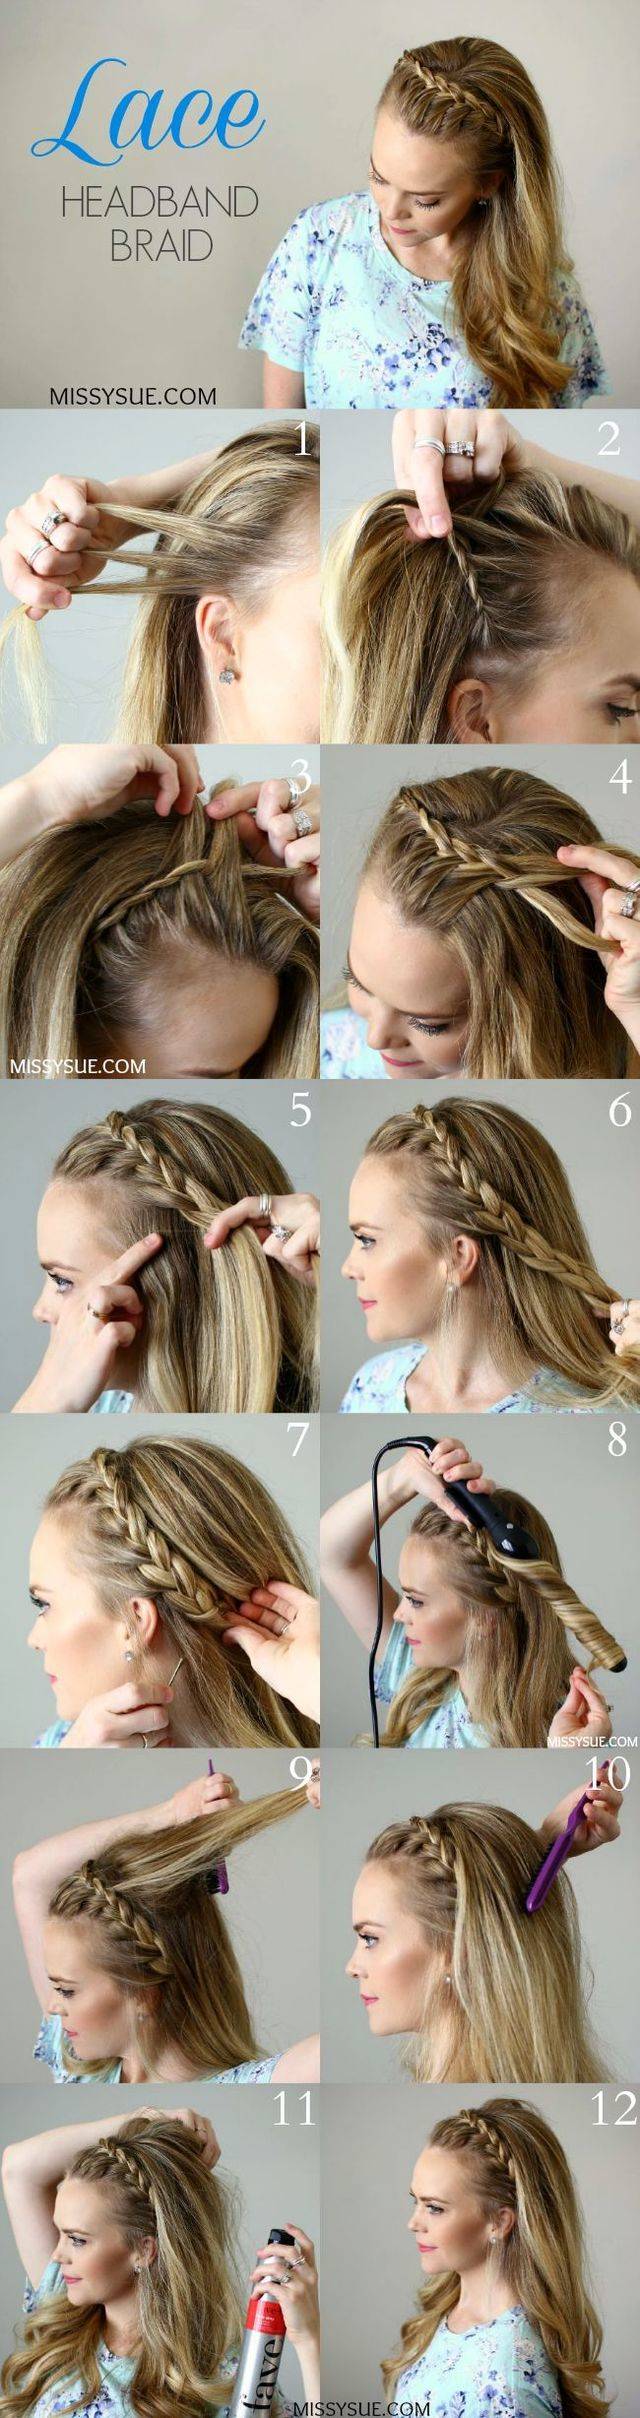 https://image.sistacafe.com/images/uploads/content_image/image/39693/1443080134-15-stylish-mermaid-hairstyles-to-pair-your-looks1.jpg